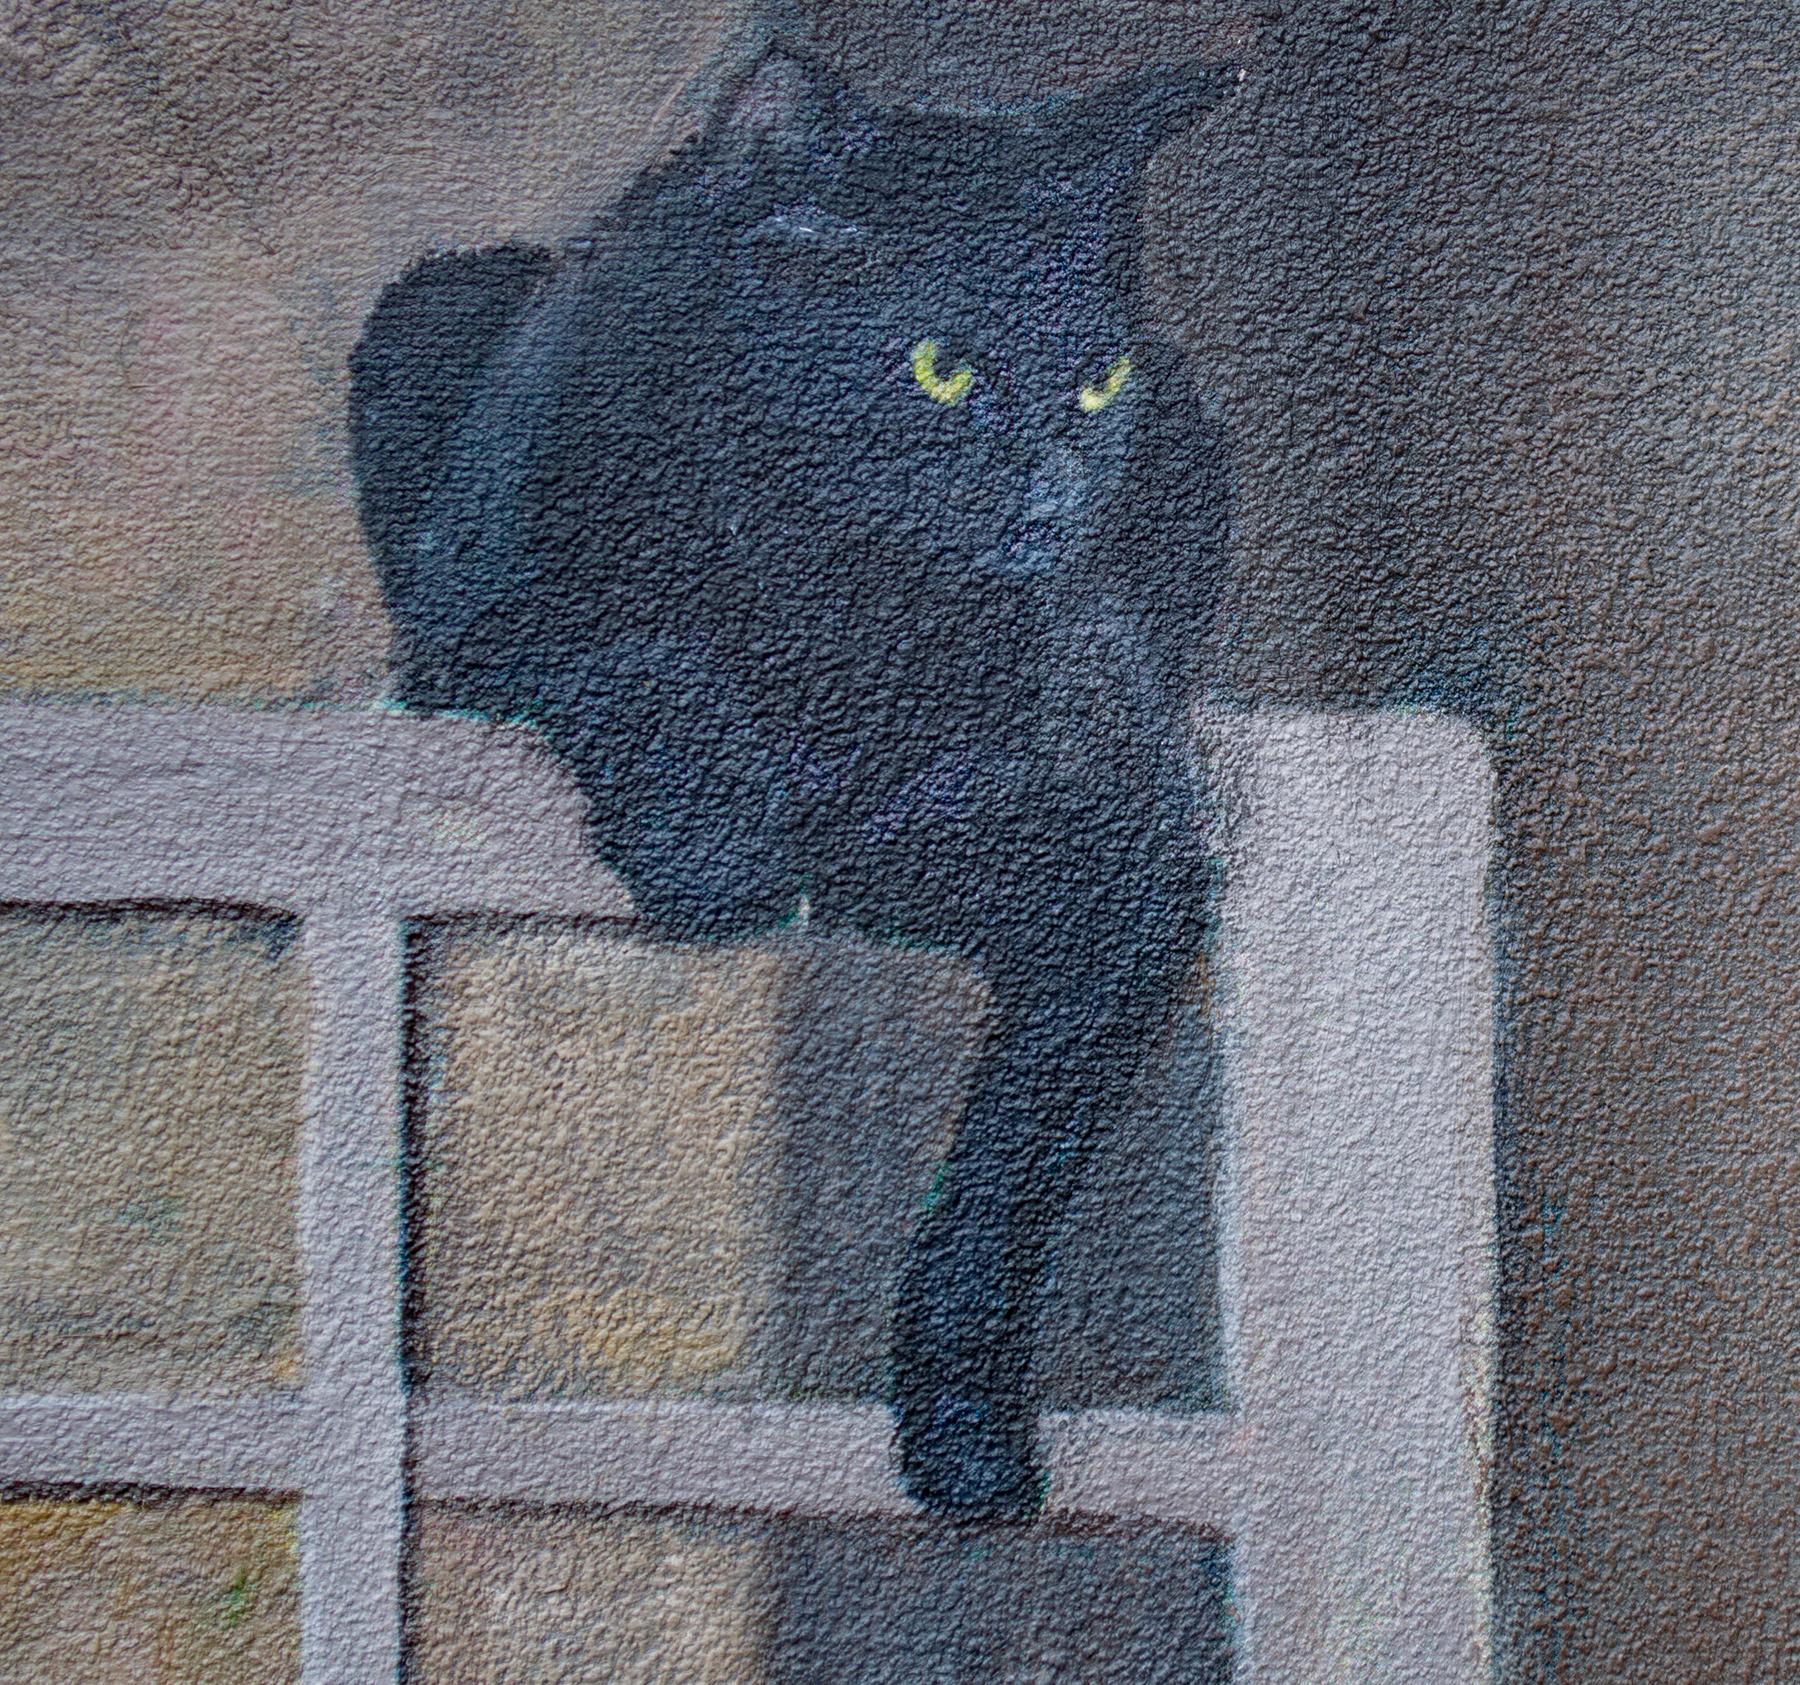 Once I lived in a private house.
We had four cats, and then we accidentally found the fifth.
Where he came from and how long he lived with us is unknown).
For texture on the primed canvas before painting, a layer of textured paste with small glass